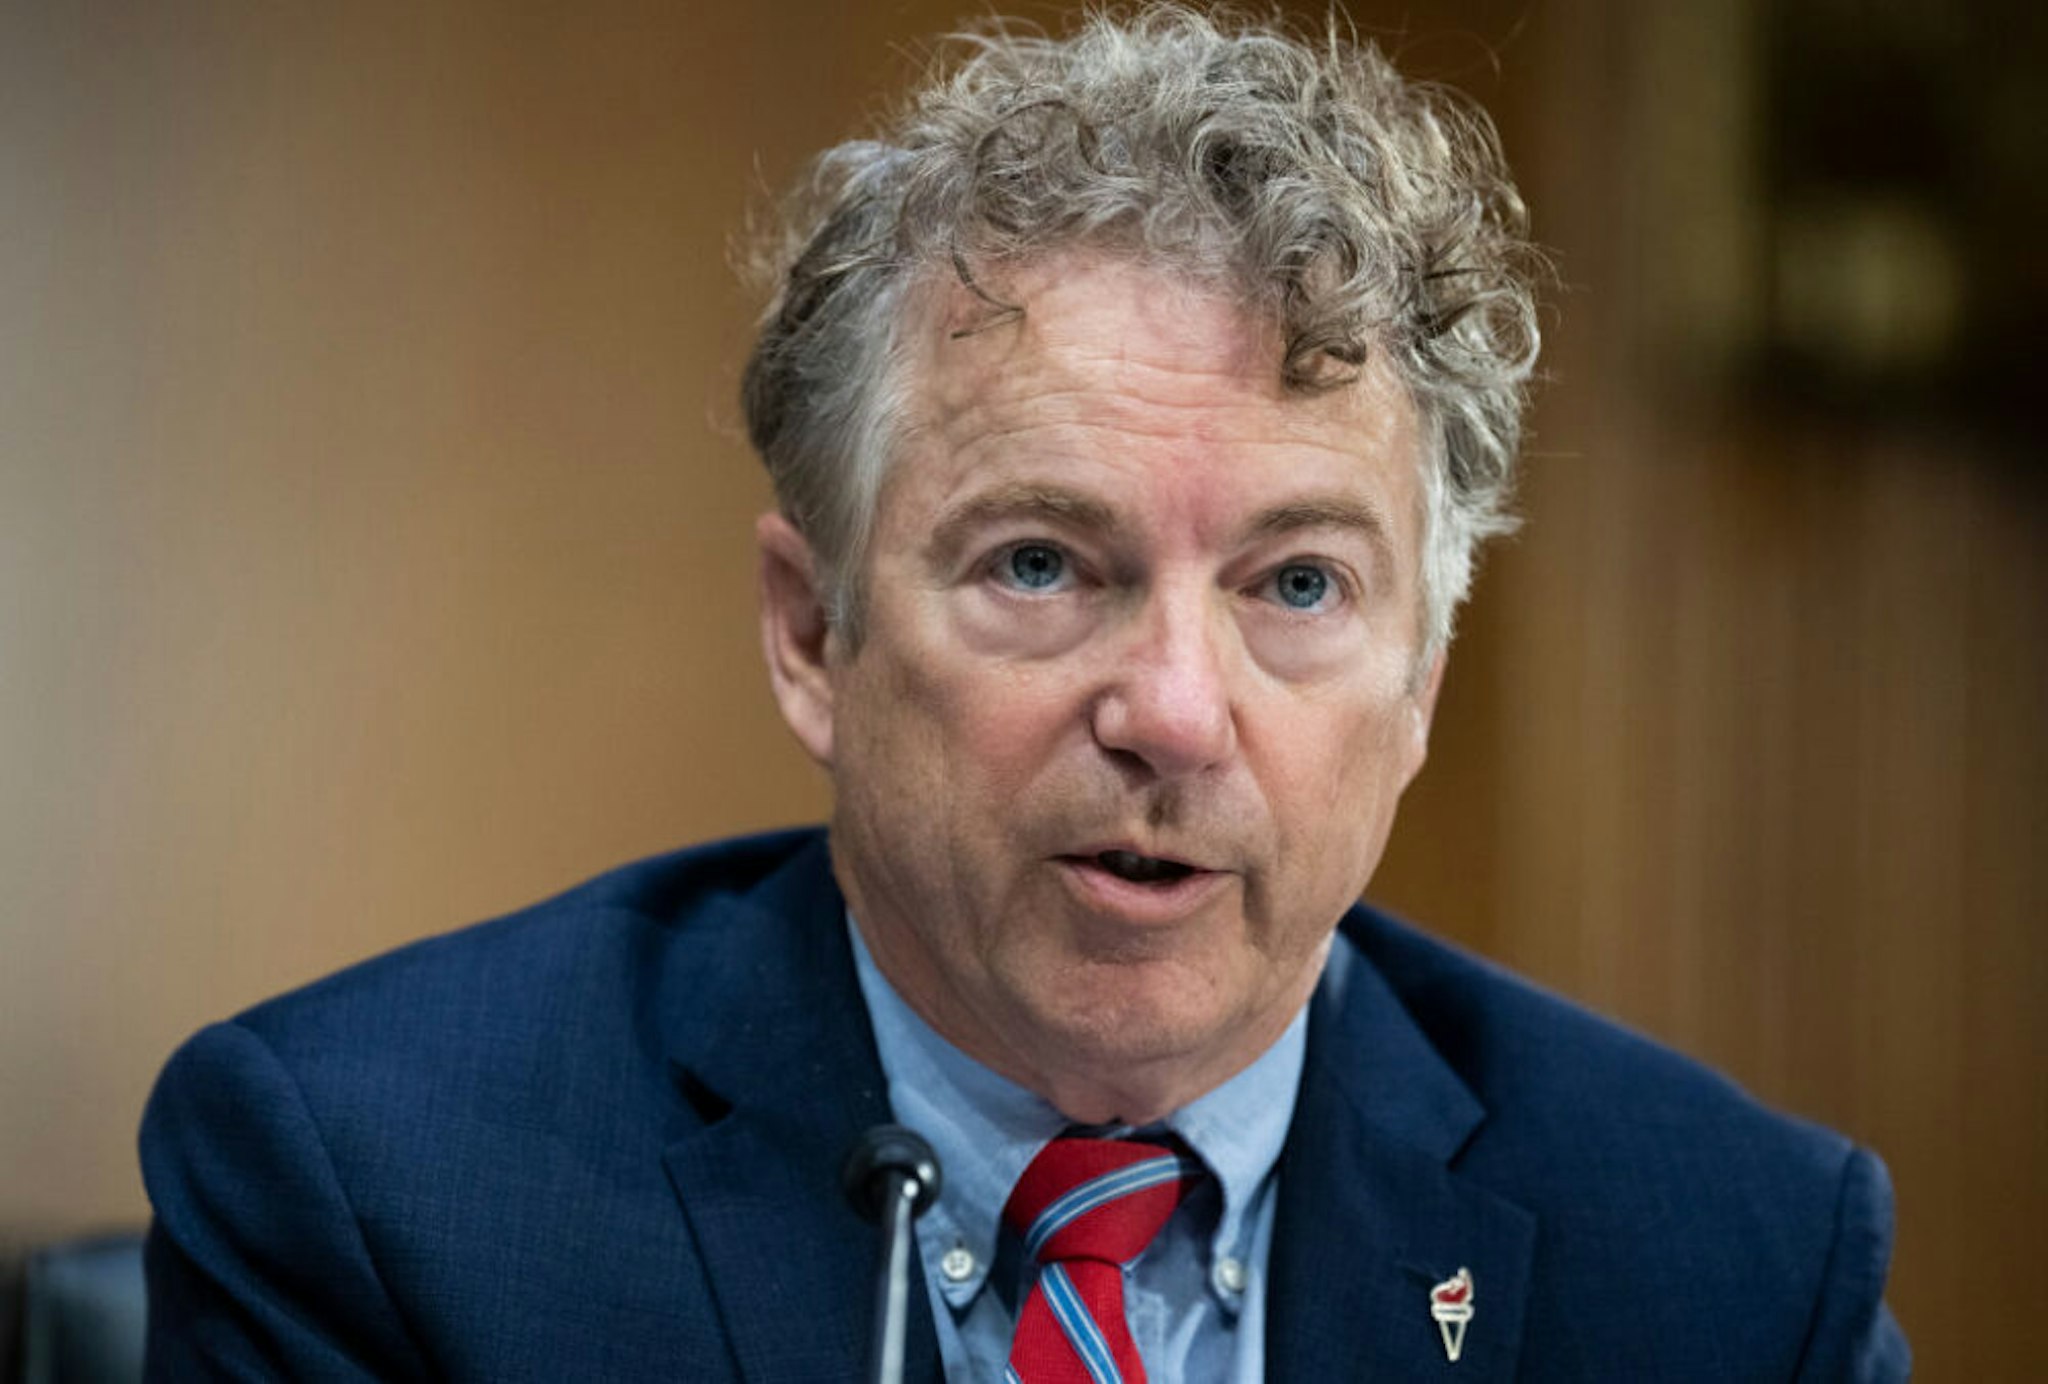 UNITED STATES - MARCH 15: Sen. Rand Paul, R-Ky., attends the Senate Health, Education, Labor and Pensions Committee markup on the PREVENT Pandemics Act in Dirksen Building on Tuesday, March 15, 2022.